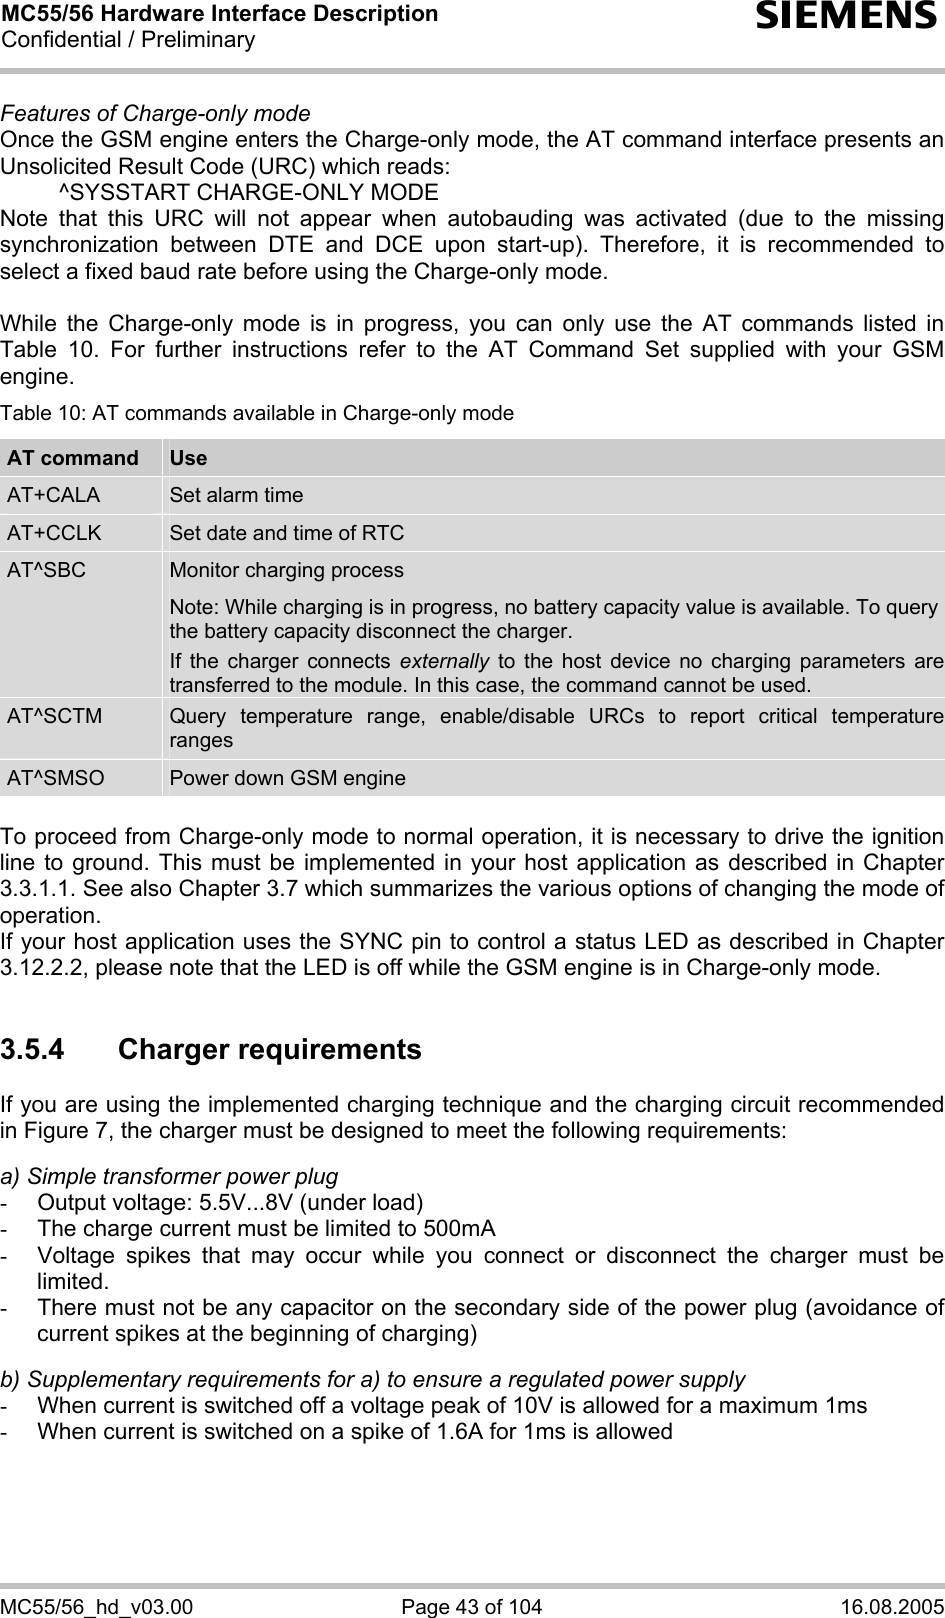 MC55/56 Hardware Interface Description Confidential / Preliminary s MC55/56_hd_v03.00  Page 43 of 104  16.08.2005 Features of Charge-only mode Once the GSM engine enters the Charge-only mode, the AT command interface presents an Unsolicited Result Code (URC) which reads:   ^SYSSTART CHARGE-ONLY MODE Note that this URC will not appear when autobauding was activated (due to the missing synchronization between DTE and DCE upon start-up). Therefore, it is recommended to select a fixed baud rate before using the Charge-only mode.  While the Charge-only mode is in progress, you can only use the AT commands listed in Table 10. For further instructions refer to the AT Command Set supplied with your GSM engine. Table 10: AT commands available in Charge-only mode AT command  Use AT+CALA  Set alarm time AT+CCLK  Set date and time of RTC AT^SBC  Monitor charging process Note: While charging is in progress, no battery capacity value is available. To query the battery capacity disconnect the charger.  If the charger connects externally to the host device no charging parameters are transferred to the module. In this case, the command cannot be used. AT^SCTM  Query temperature range, enable/disable URCs to report critical temperature ranges AT^SMSO  Power down GSM engine  To proceed from Charge-only mode to normal operation, it is necessary to drive the ignition line to ground. This must be implemented in your host application as described in Chapter 3.3.1.1. See also Chapter 3.7 which summarizes the various options of changing the mode of operation. If your host application uses the SYNC pin to control a status LED as described in Chapter 3.12.2.2, please note that the LED is off while the GSM engine is in Charge-only mode.  3.5.4 Charger requirements If you are using the implemented charging technique and the charging circuit recommended in Figure 7, the charger must be designed to meet the following requirements:   a) Simple transformer power plug -  Output voltage: 5.5V...8V (under load) -  The charge current must be limited to 500mA -  Voltage spikes that may occur while you connect or disconnect the charger must be limited. -  There must not be any capacitor on the secondary side of the power plug (avoidance of current spikes at the beginning of charging)  b) Supplementary requirements for a) to ensure a regulated power supply  -  When current is switched off a voltage peak of 10V is allowed for a maximum 1ms -  When current is switched on a spike of 1.6A for 1ms is allowed  